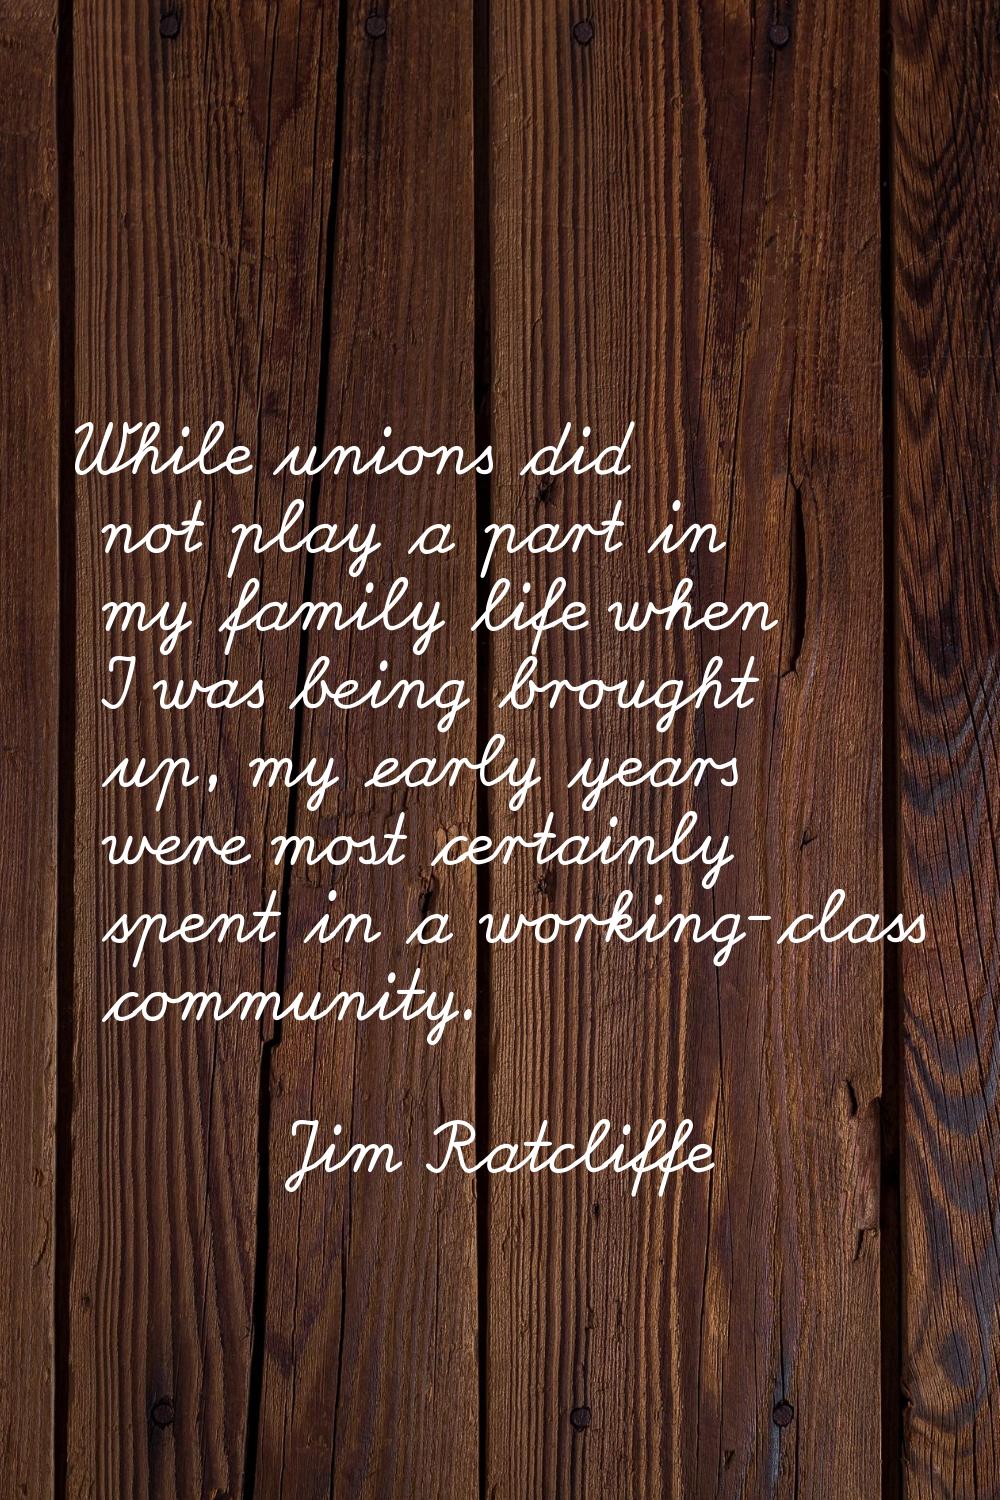 While unions did not play a part in my family life when I was being brought up, my early years were